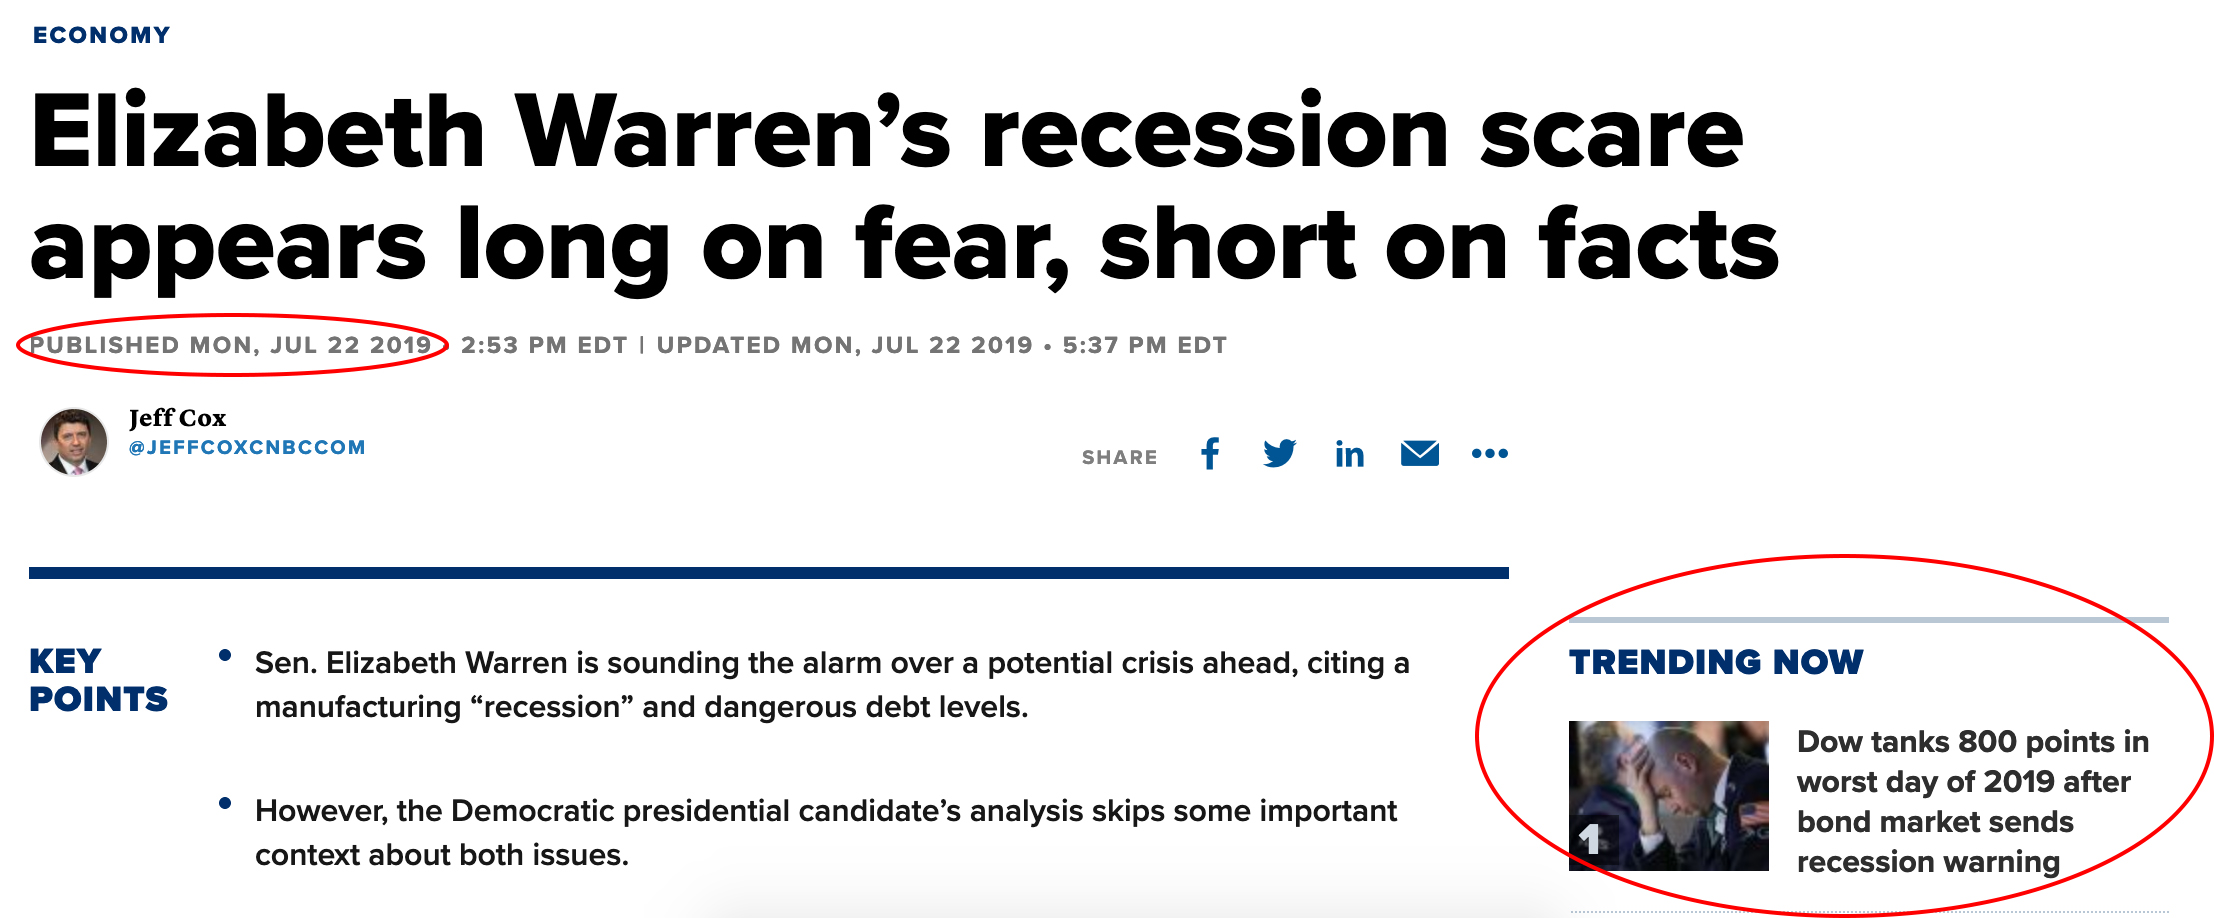 angle - Economy Elizabeth Warren's recession scare appears long on fear, short on facts Published Mon, Edt I Updated Mon, Edt Jeff Cox f y in .. Key Points Trending Now Sen. Elizabeth Warren is sounding the alarm over a potential crisis ahead, citing a…